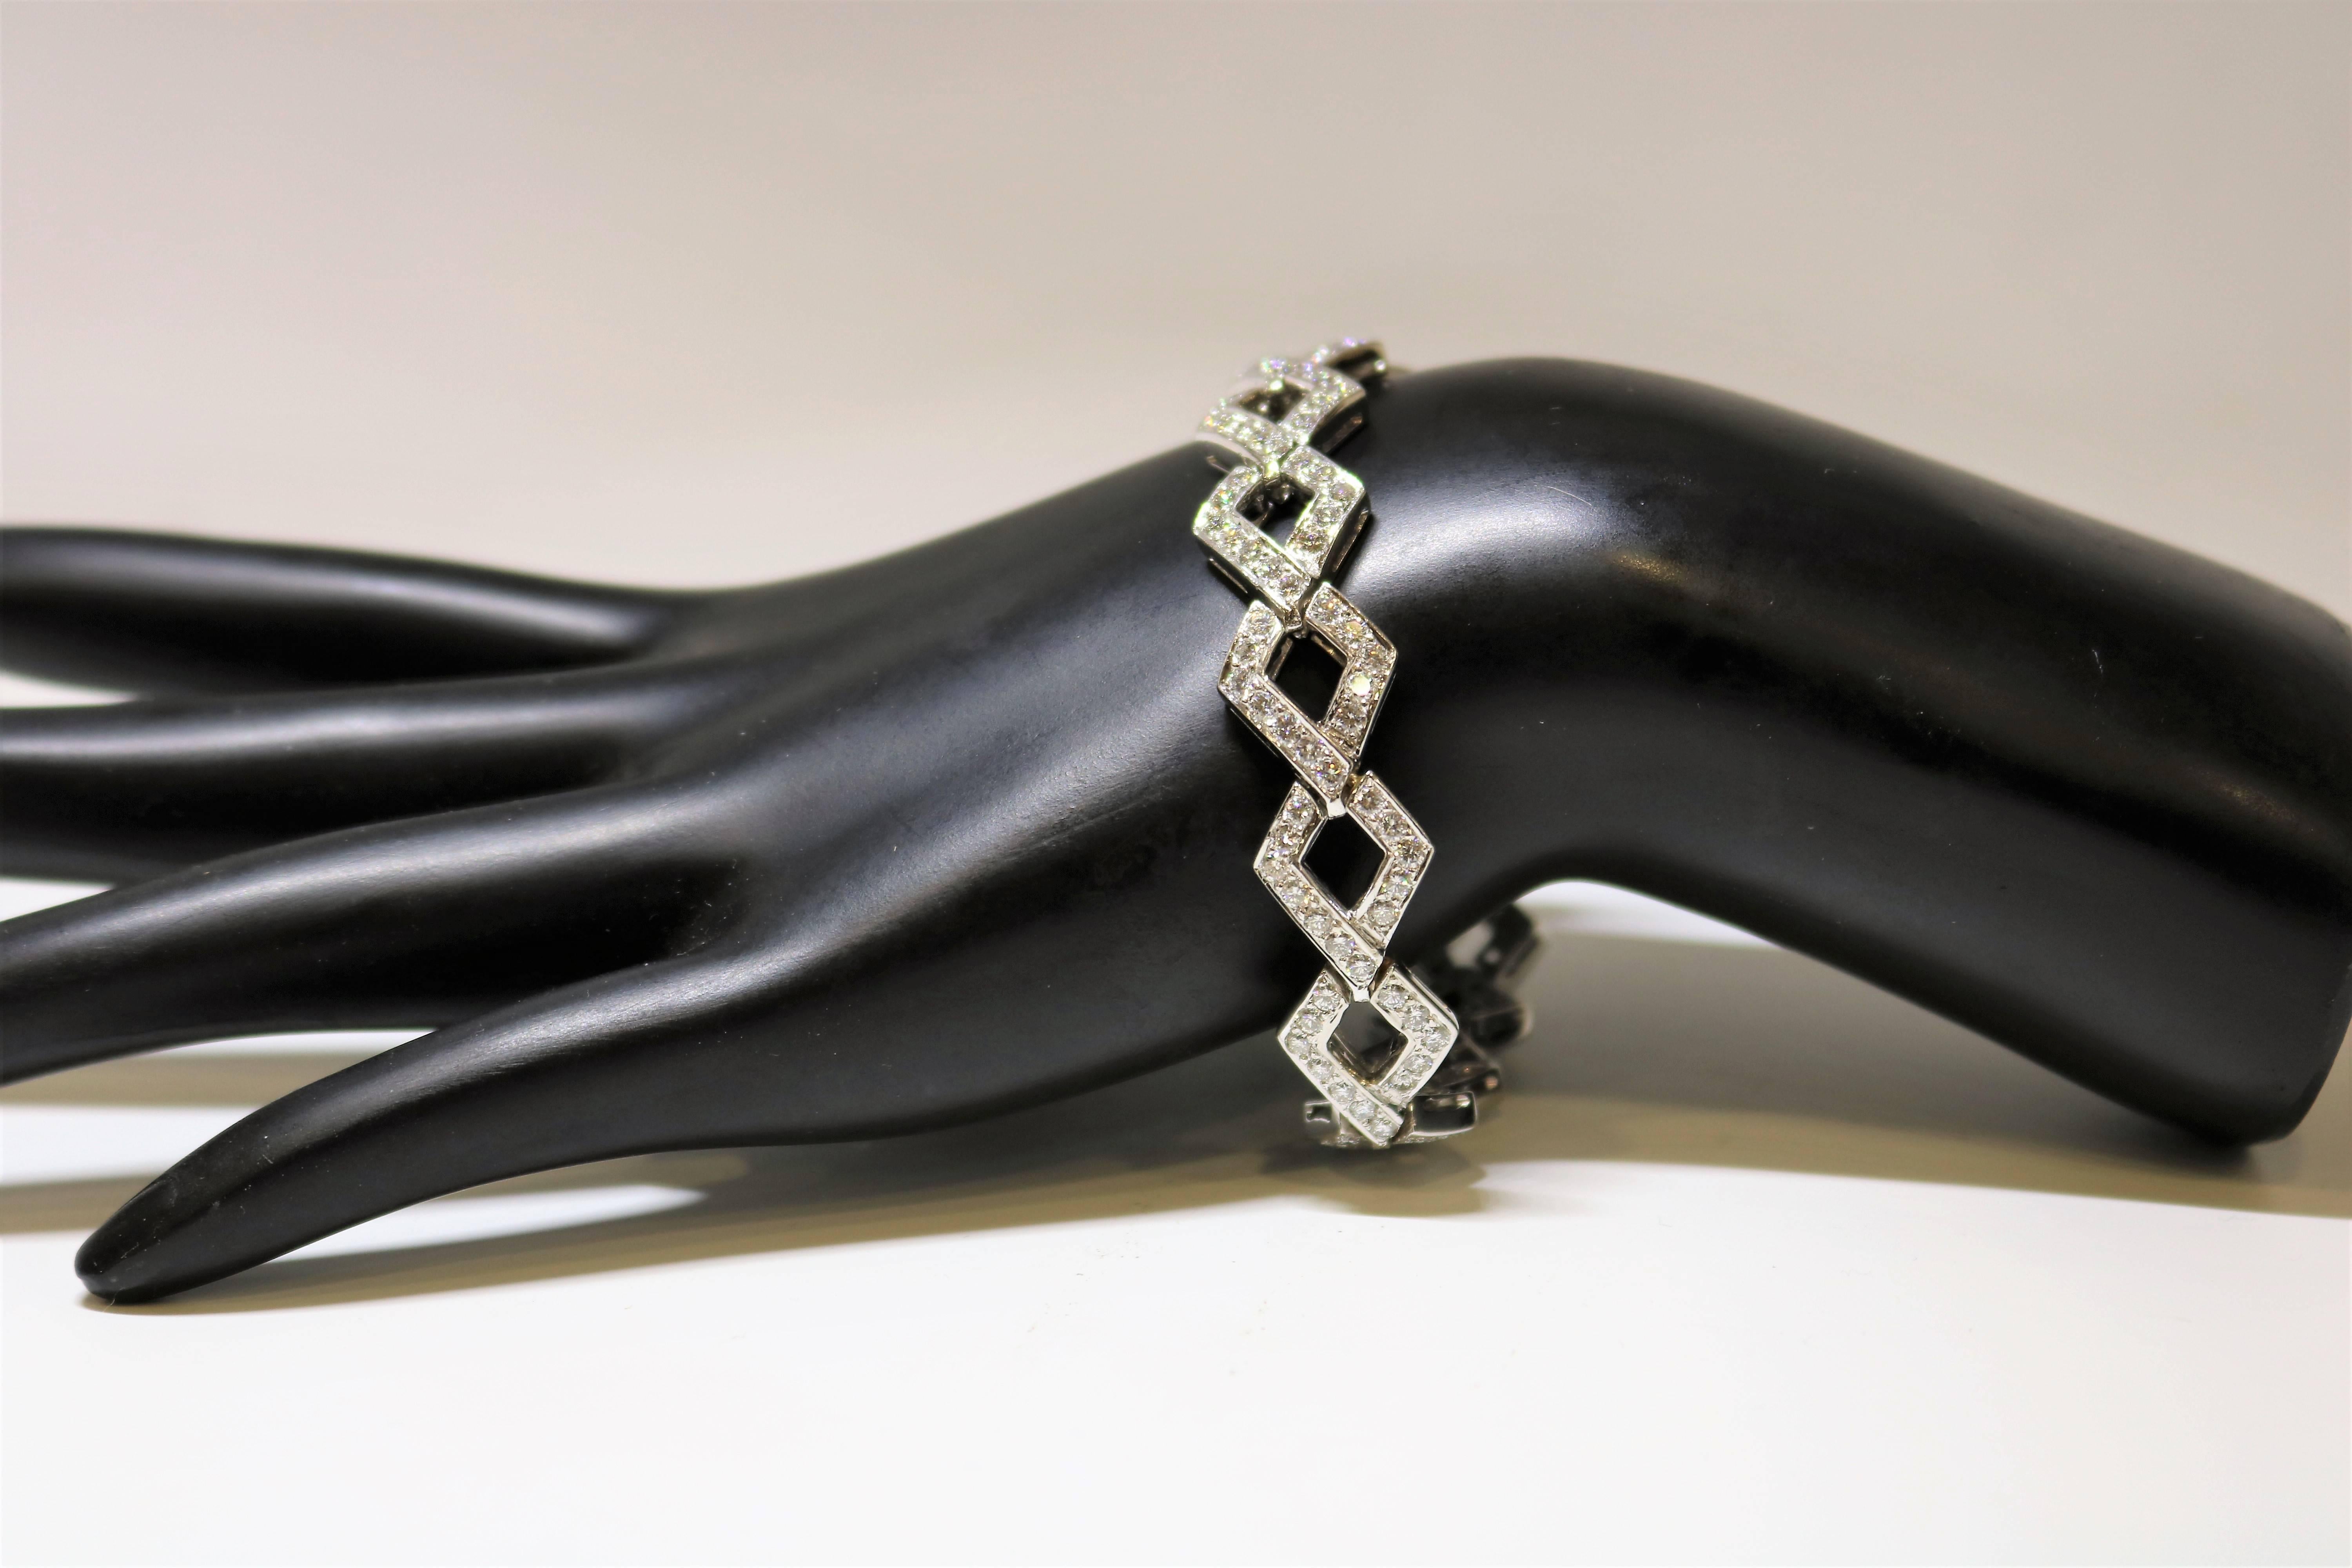 This bracelet is in 18k white gold with a total weight of 6.21 cts.